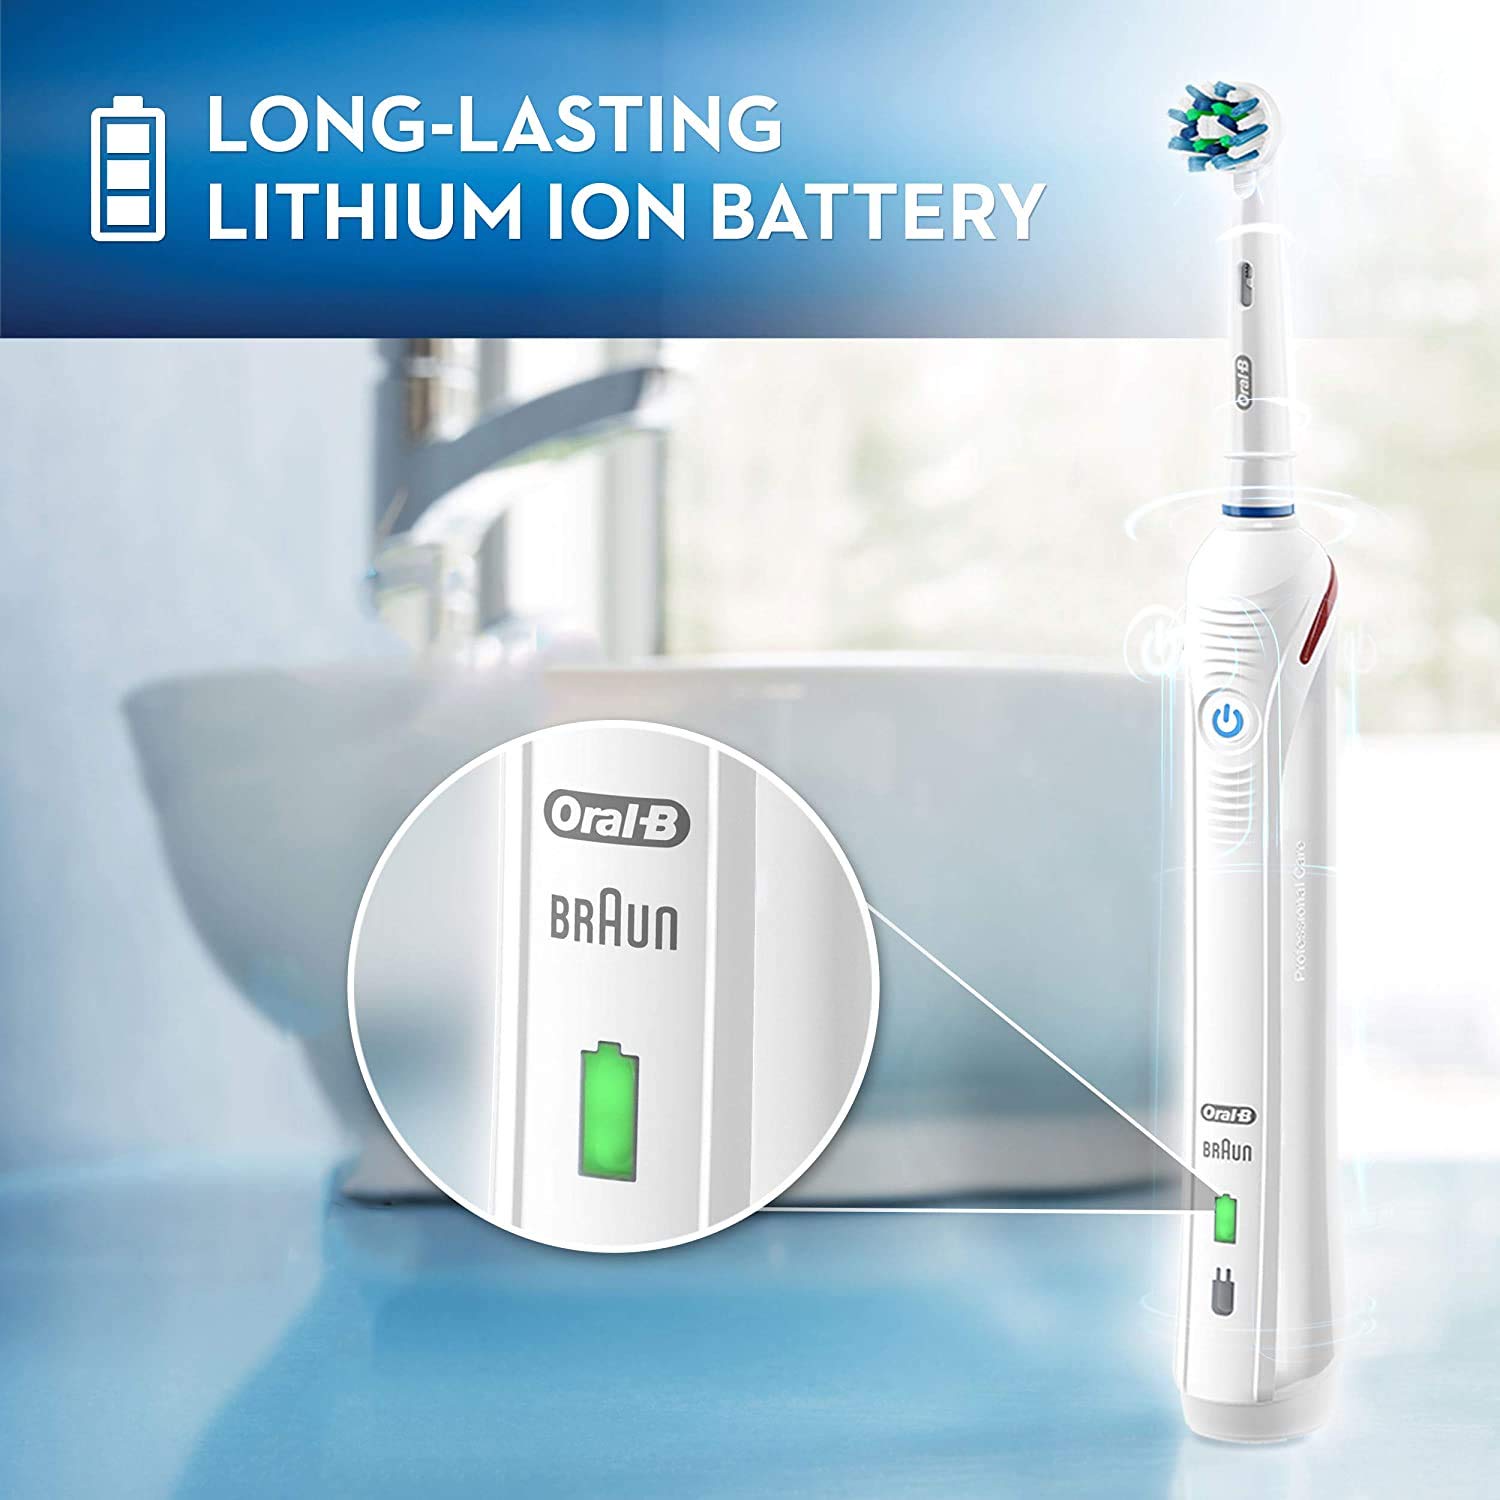 Oral-B Smart 1500 Electric Toothbrush-4